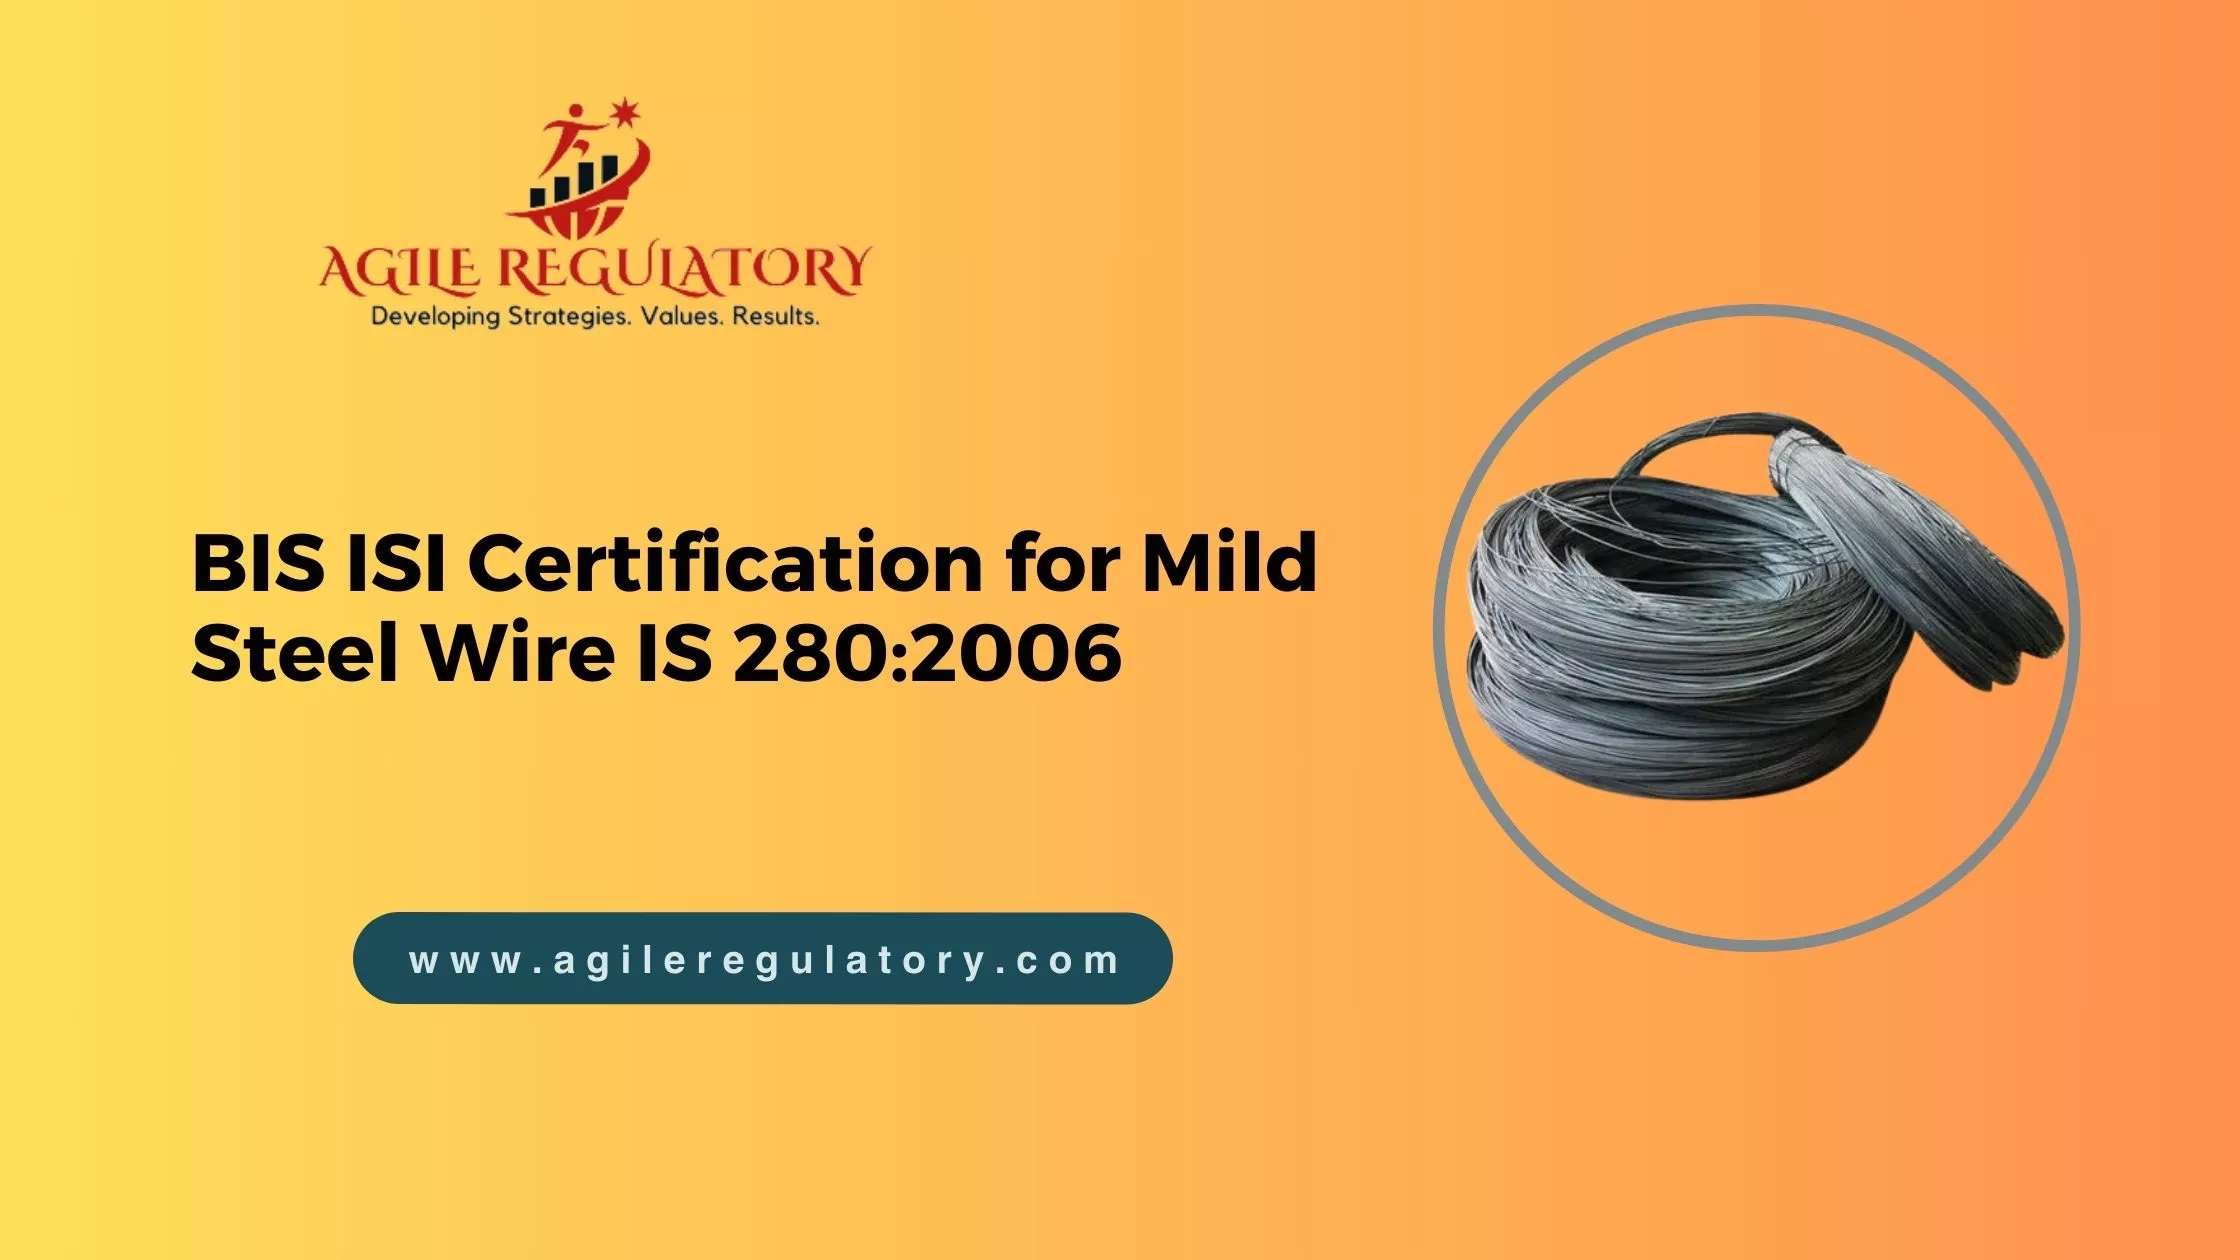 BIS ISI Certification for Mild Steel Wire IS 280:2006